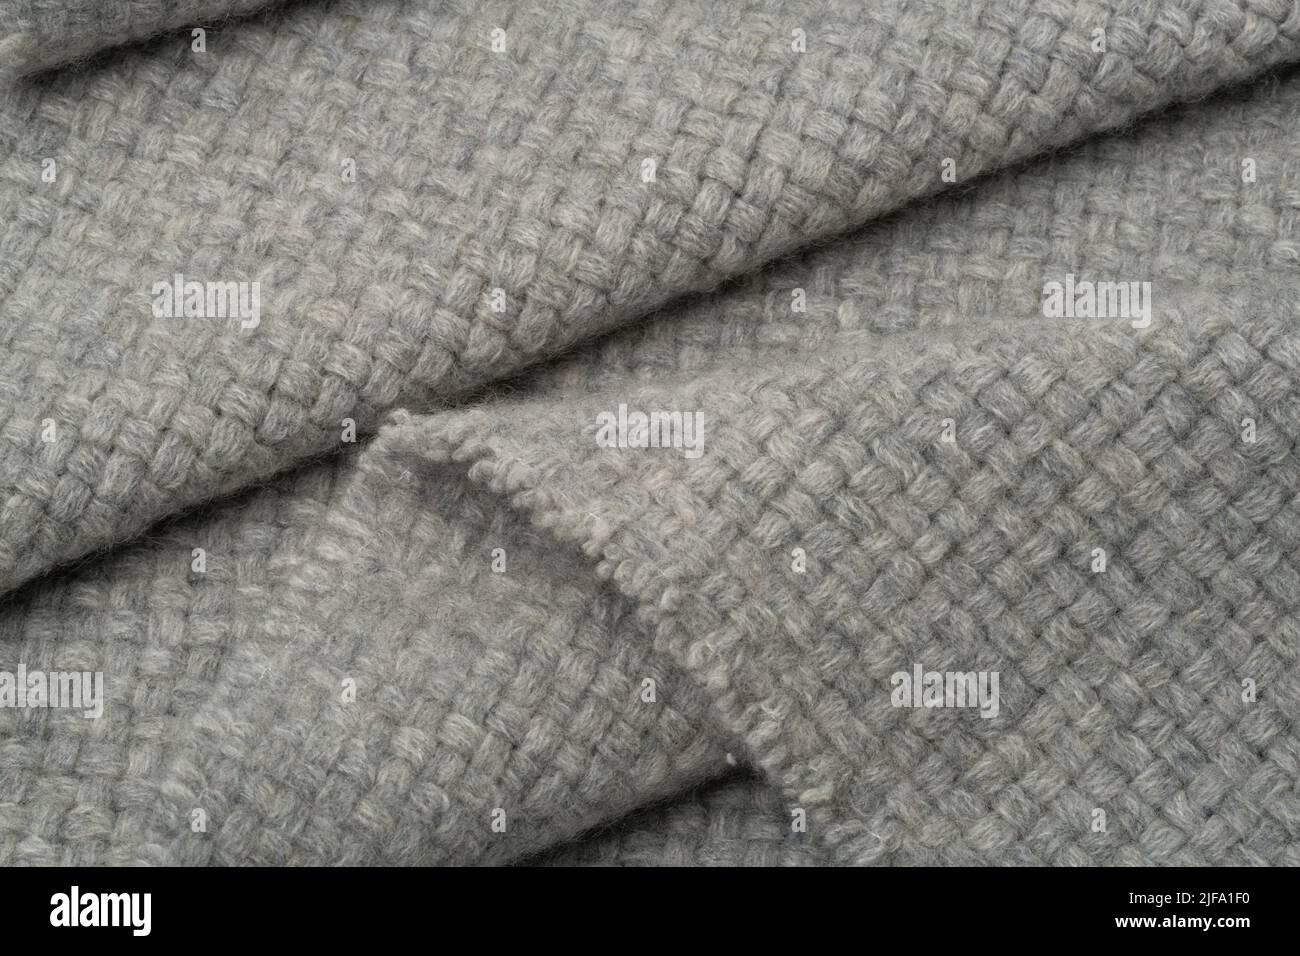 Textured fabric background. A grey woollen blanket material in folds. Stock Photo